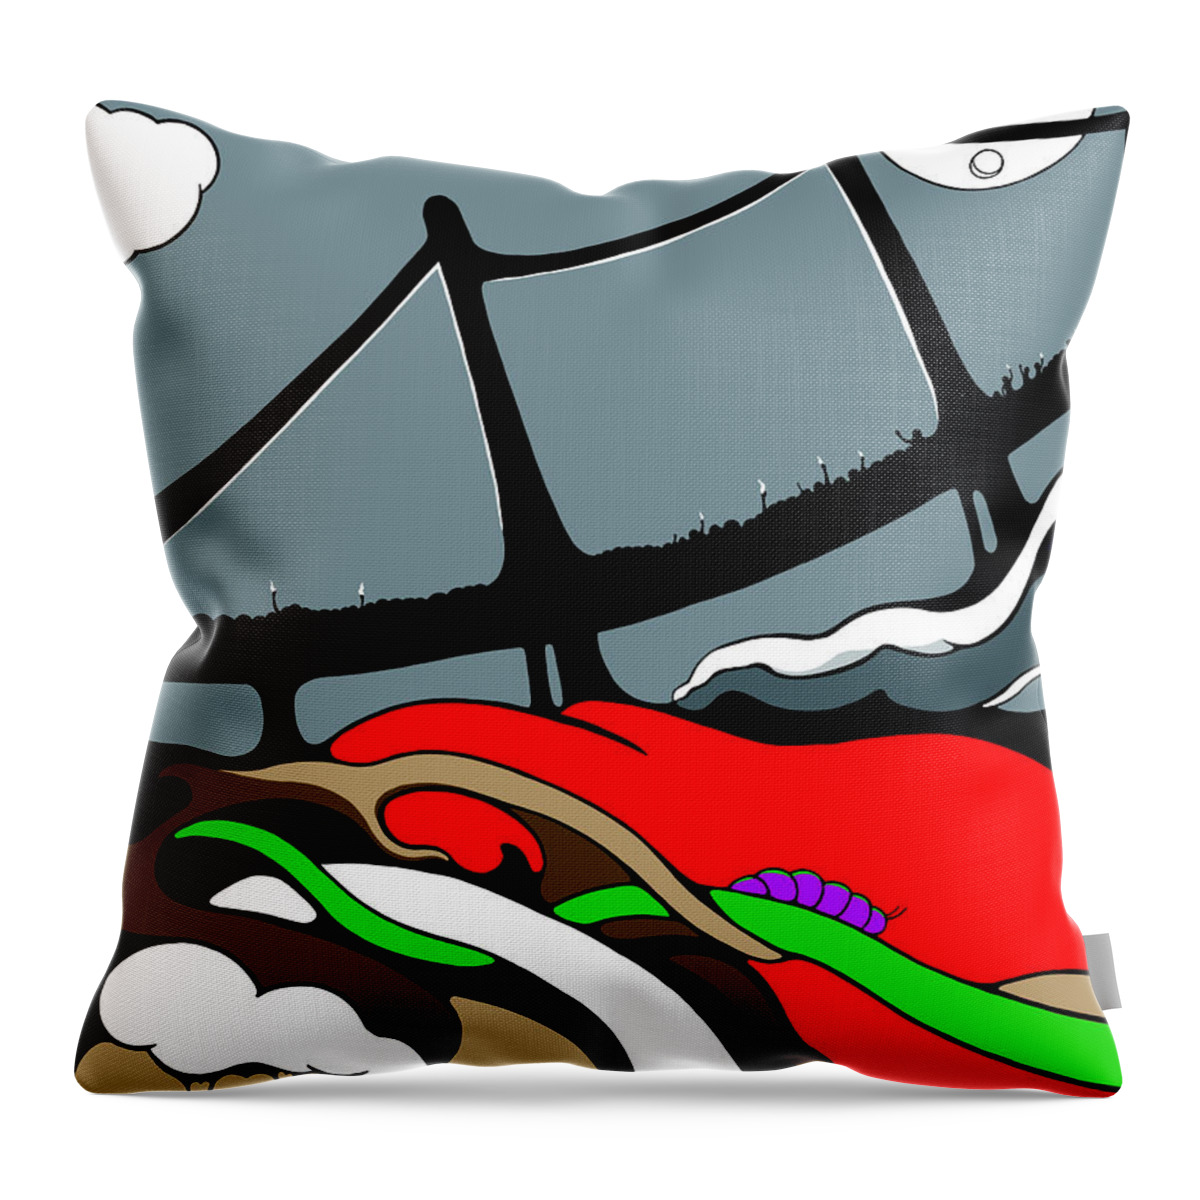 Climate Change Throw Pillow featuring the digital art The Gap by Craig Tilley